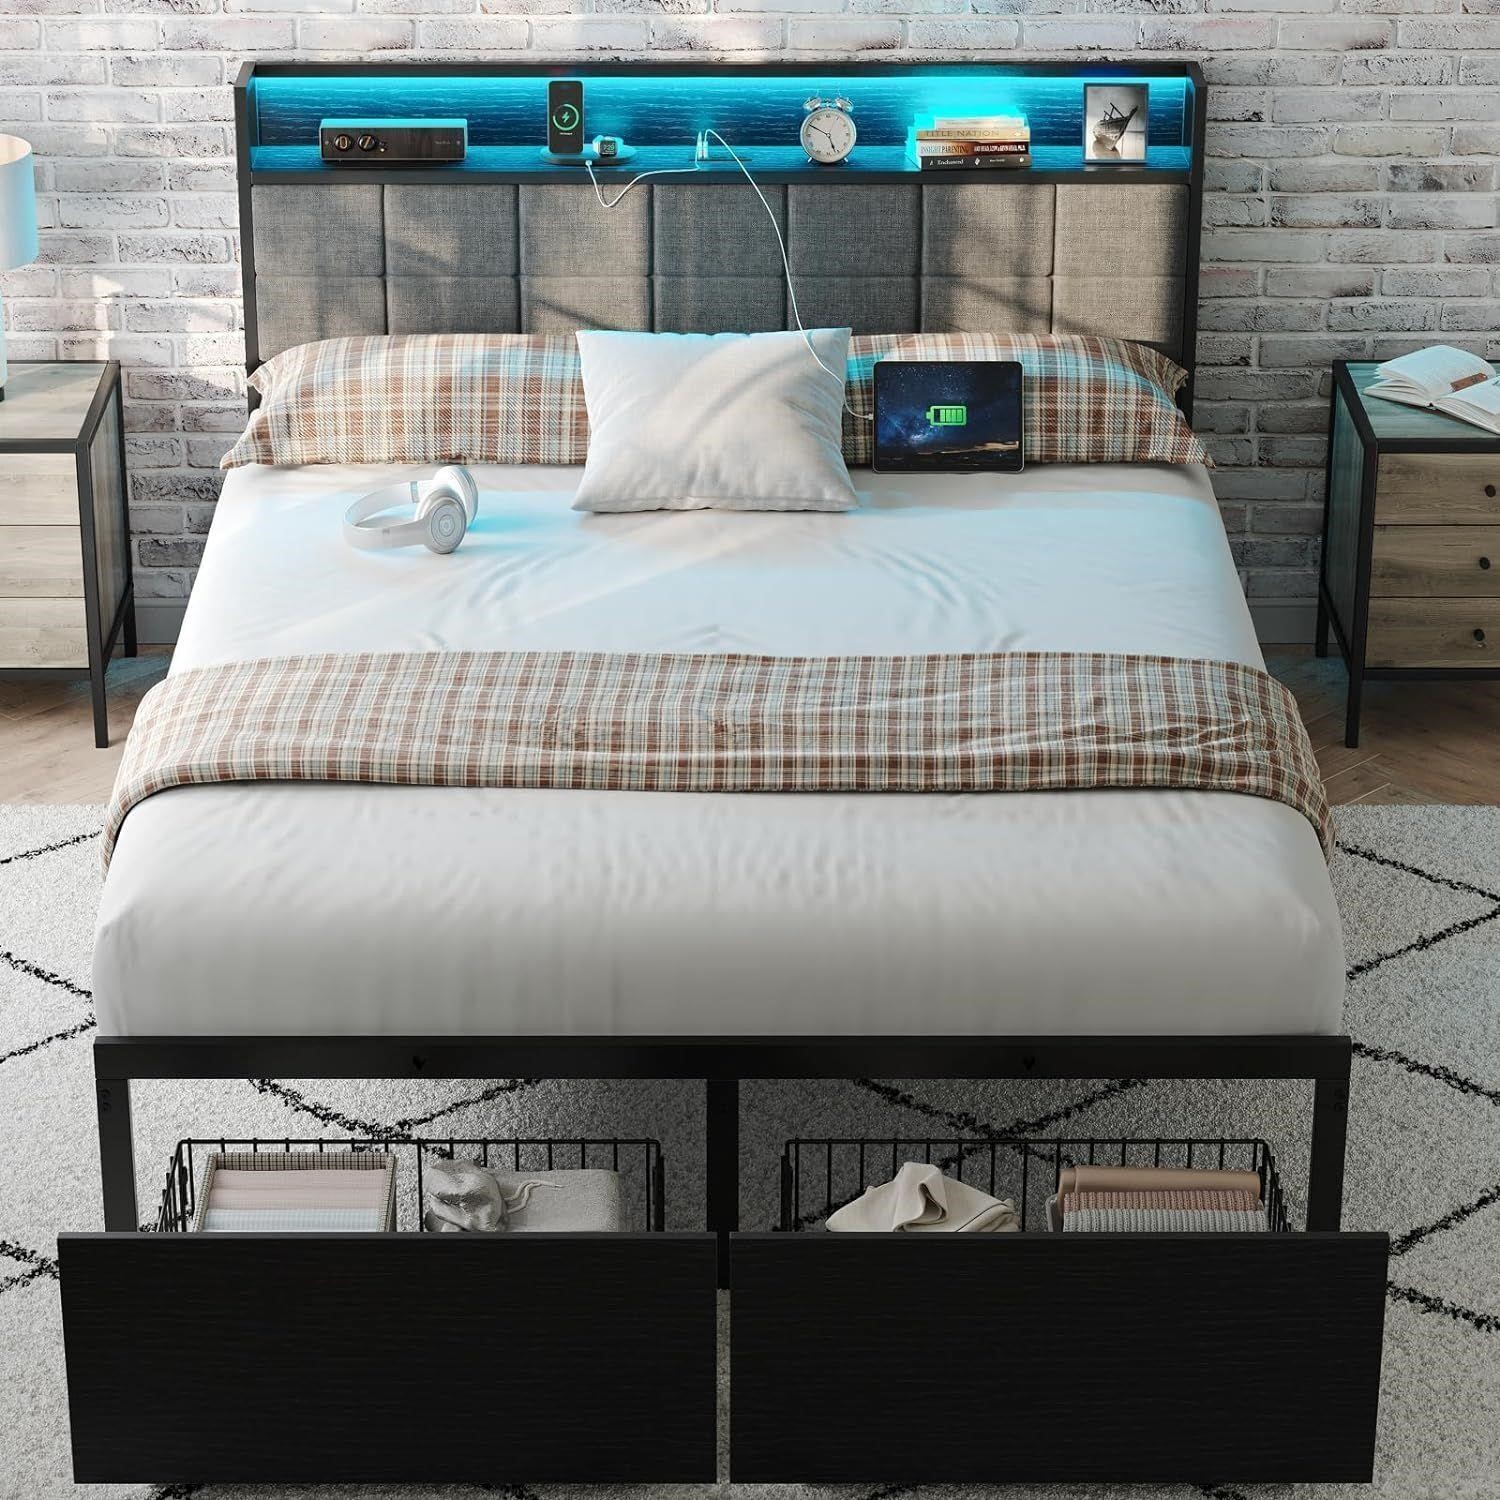 $149 - Full Size Bed Frame with Headboard and Stor